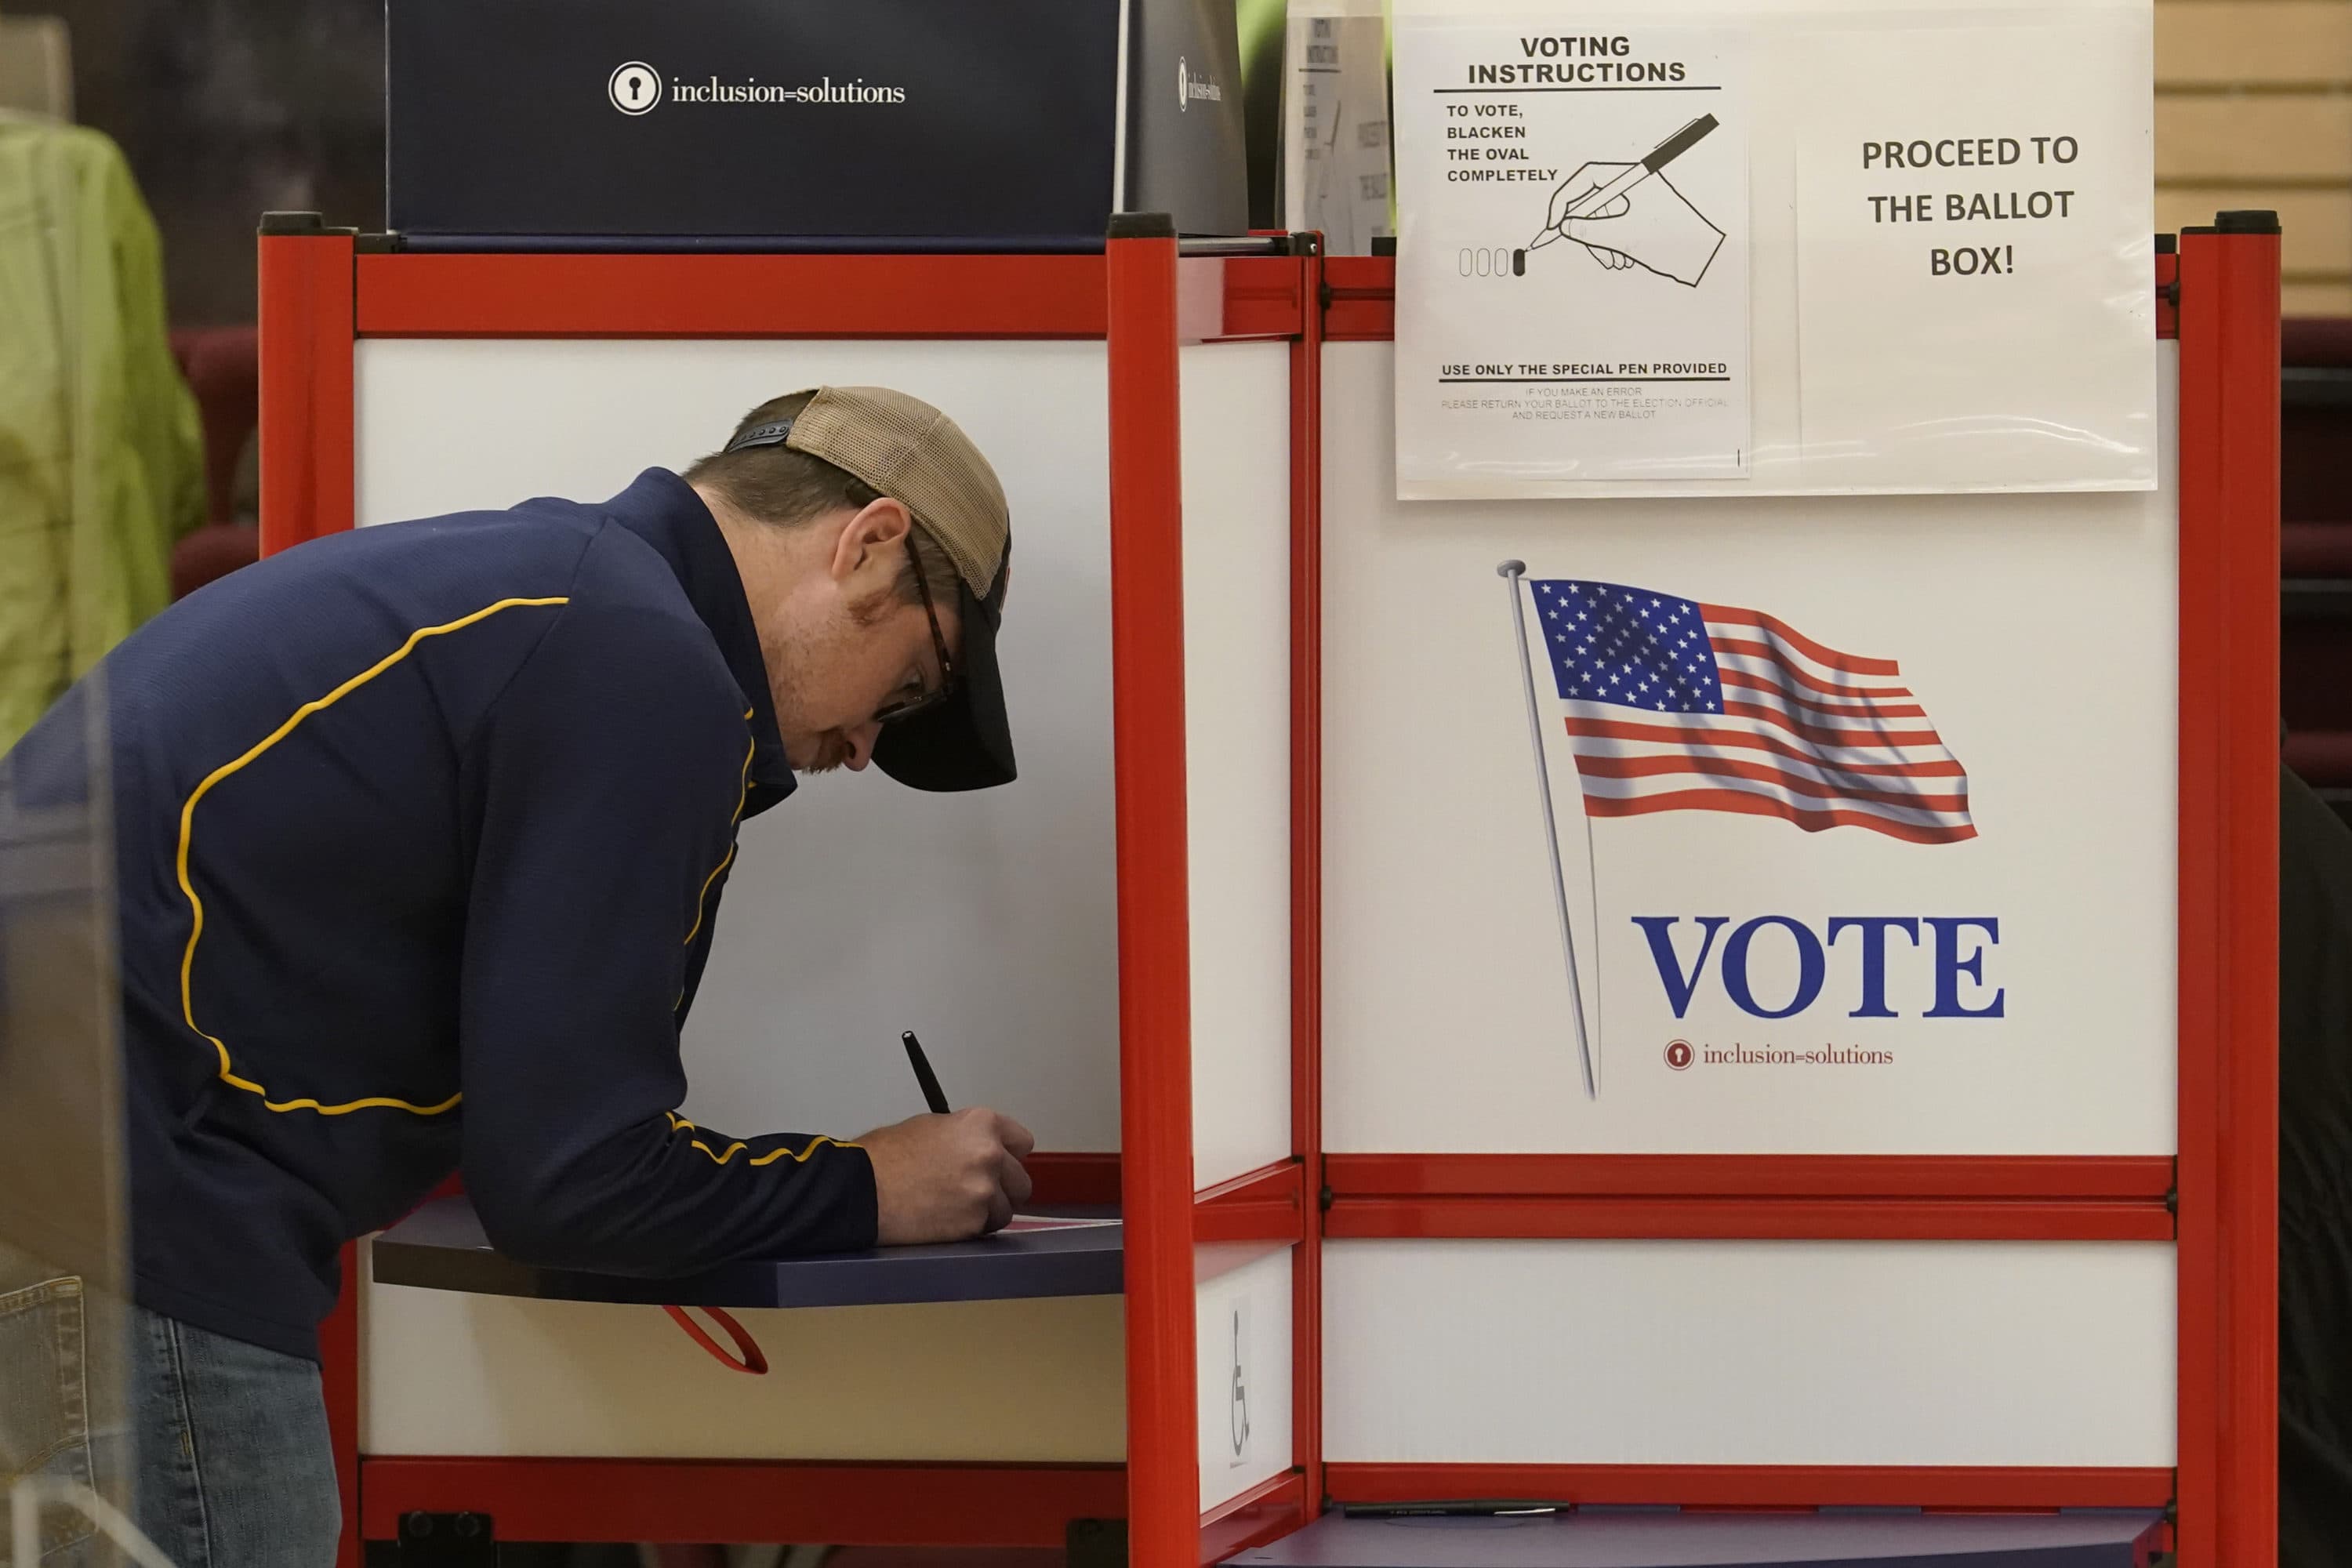 A voter fills out a ballot in the Massachusetts primary election on Sept. 6 at a polling place in Attleboro. (Steven Senne/AP)